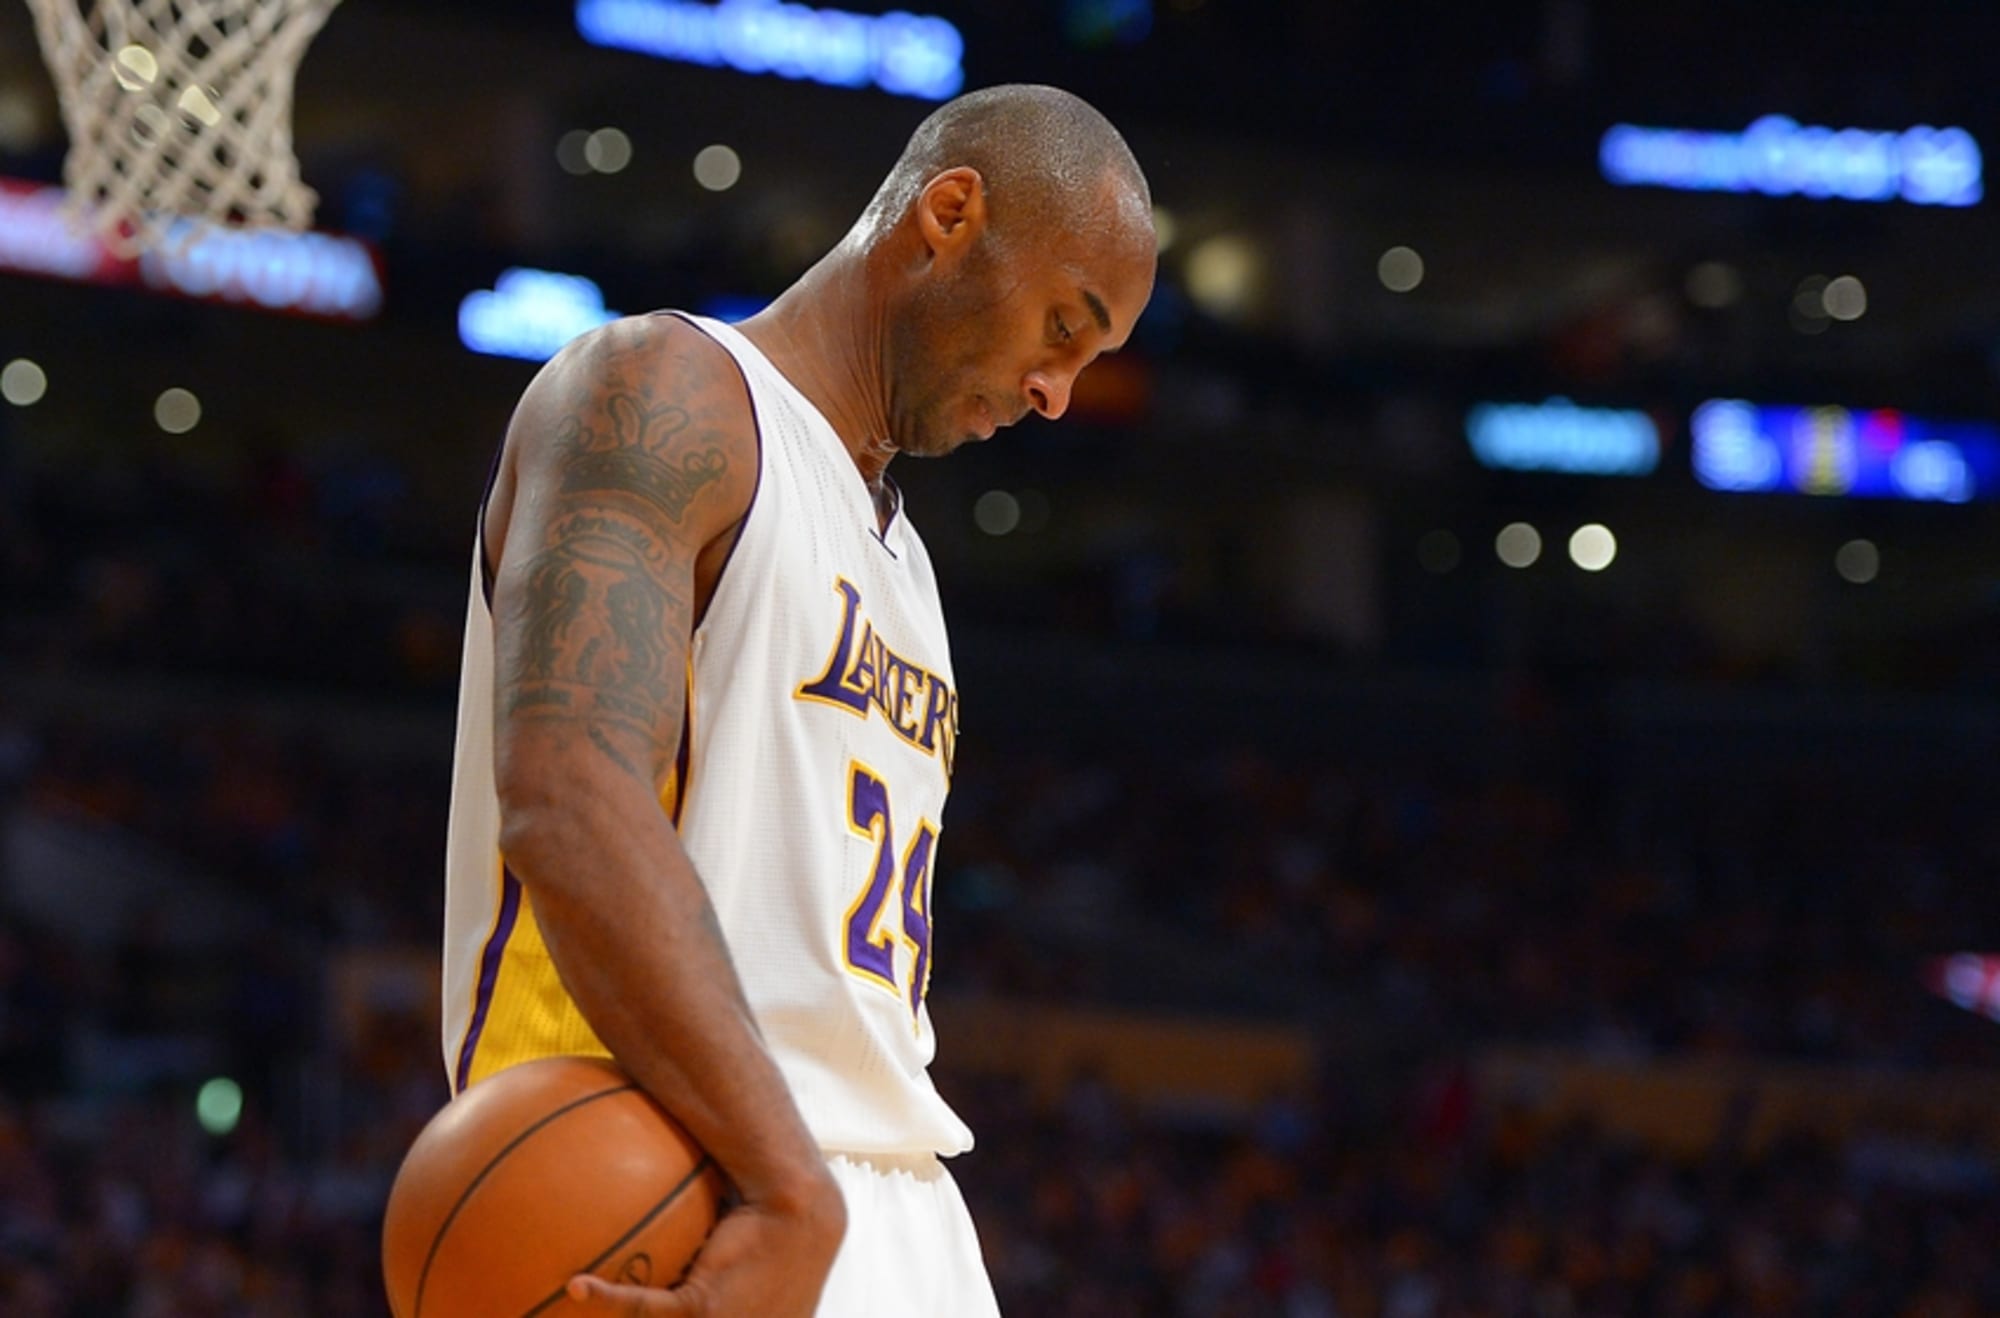 Los Angeles Lakers: This NBA Championship is for Kobe Bryant